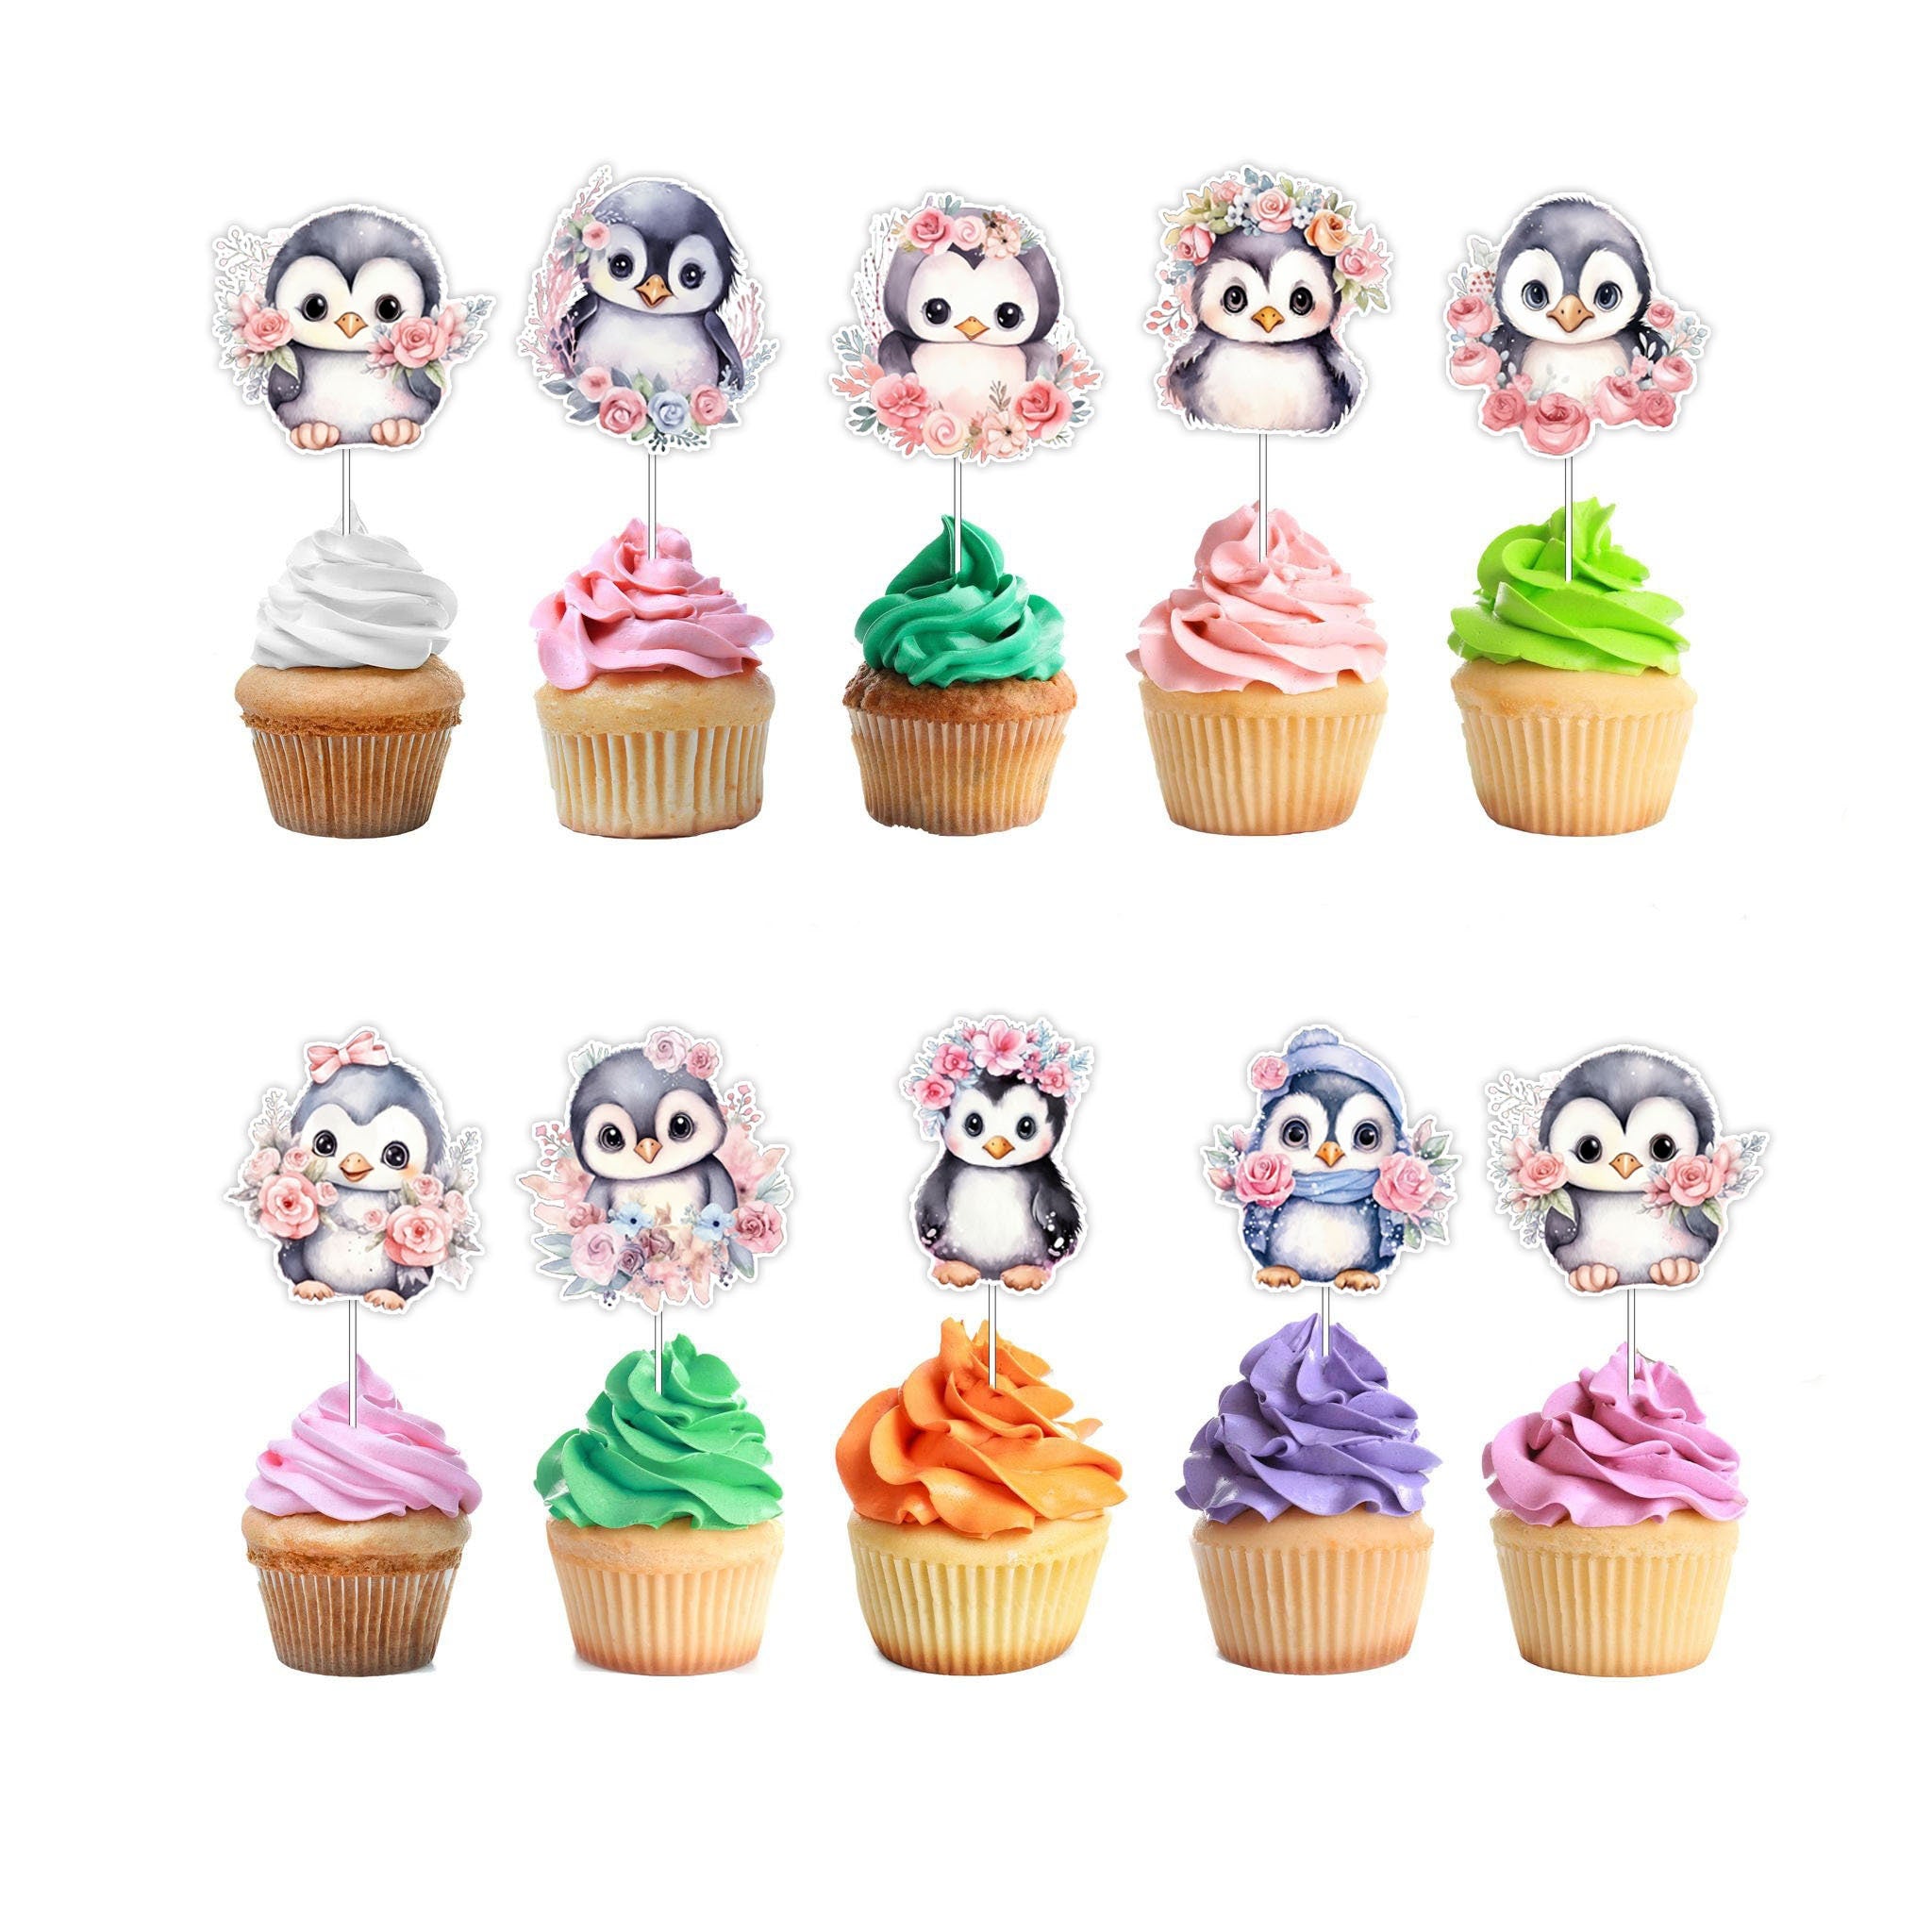 Adorable Penguin Cupcake Toppers - A Charming Addition to Your Sweet Celebrations